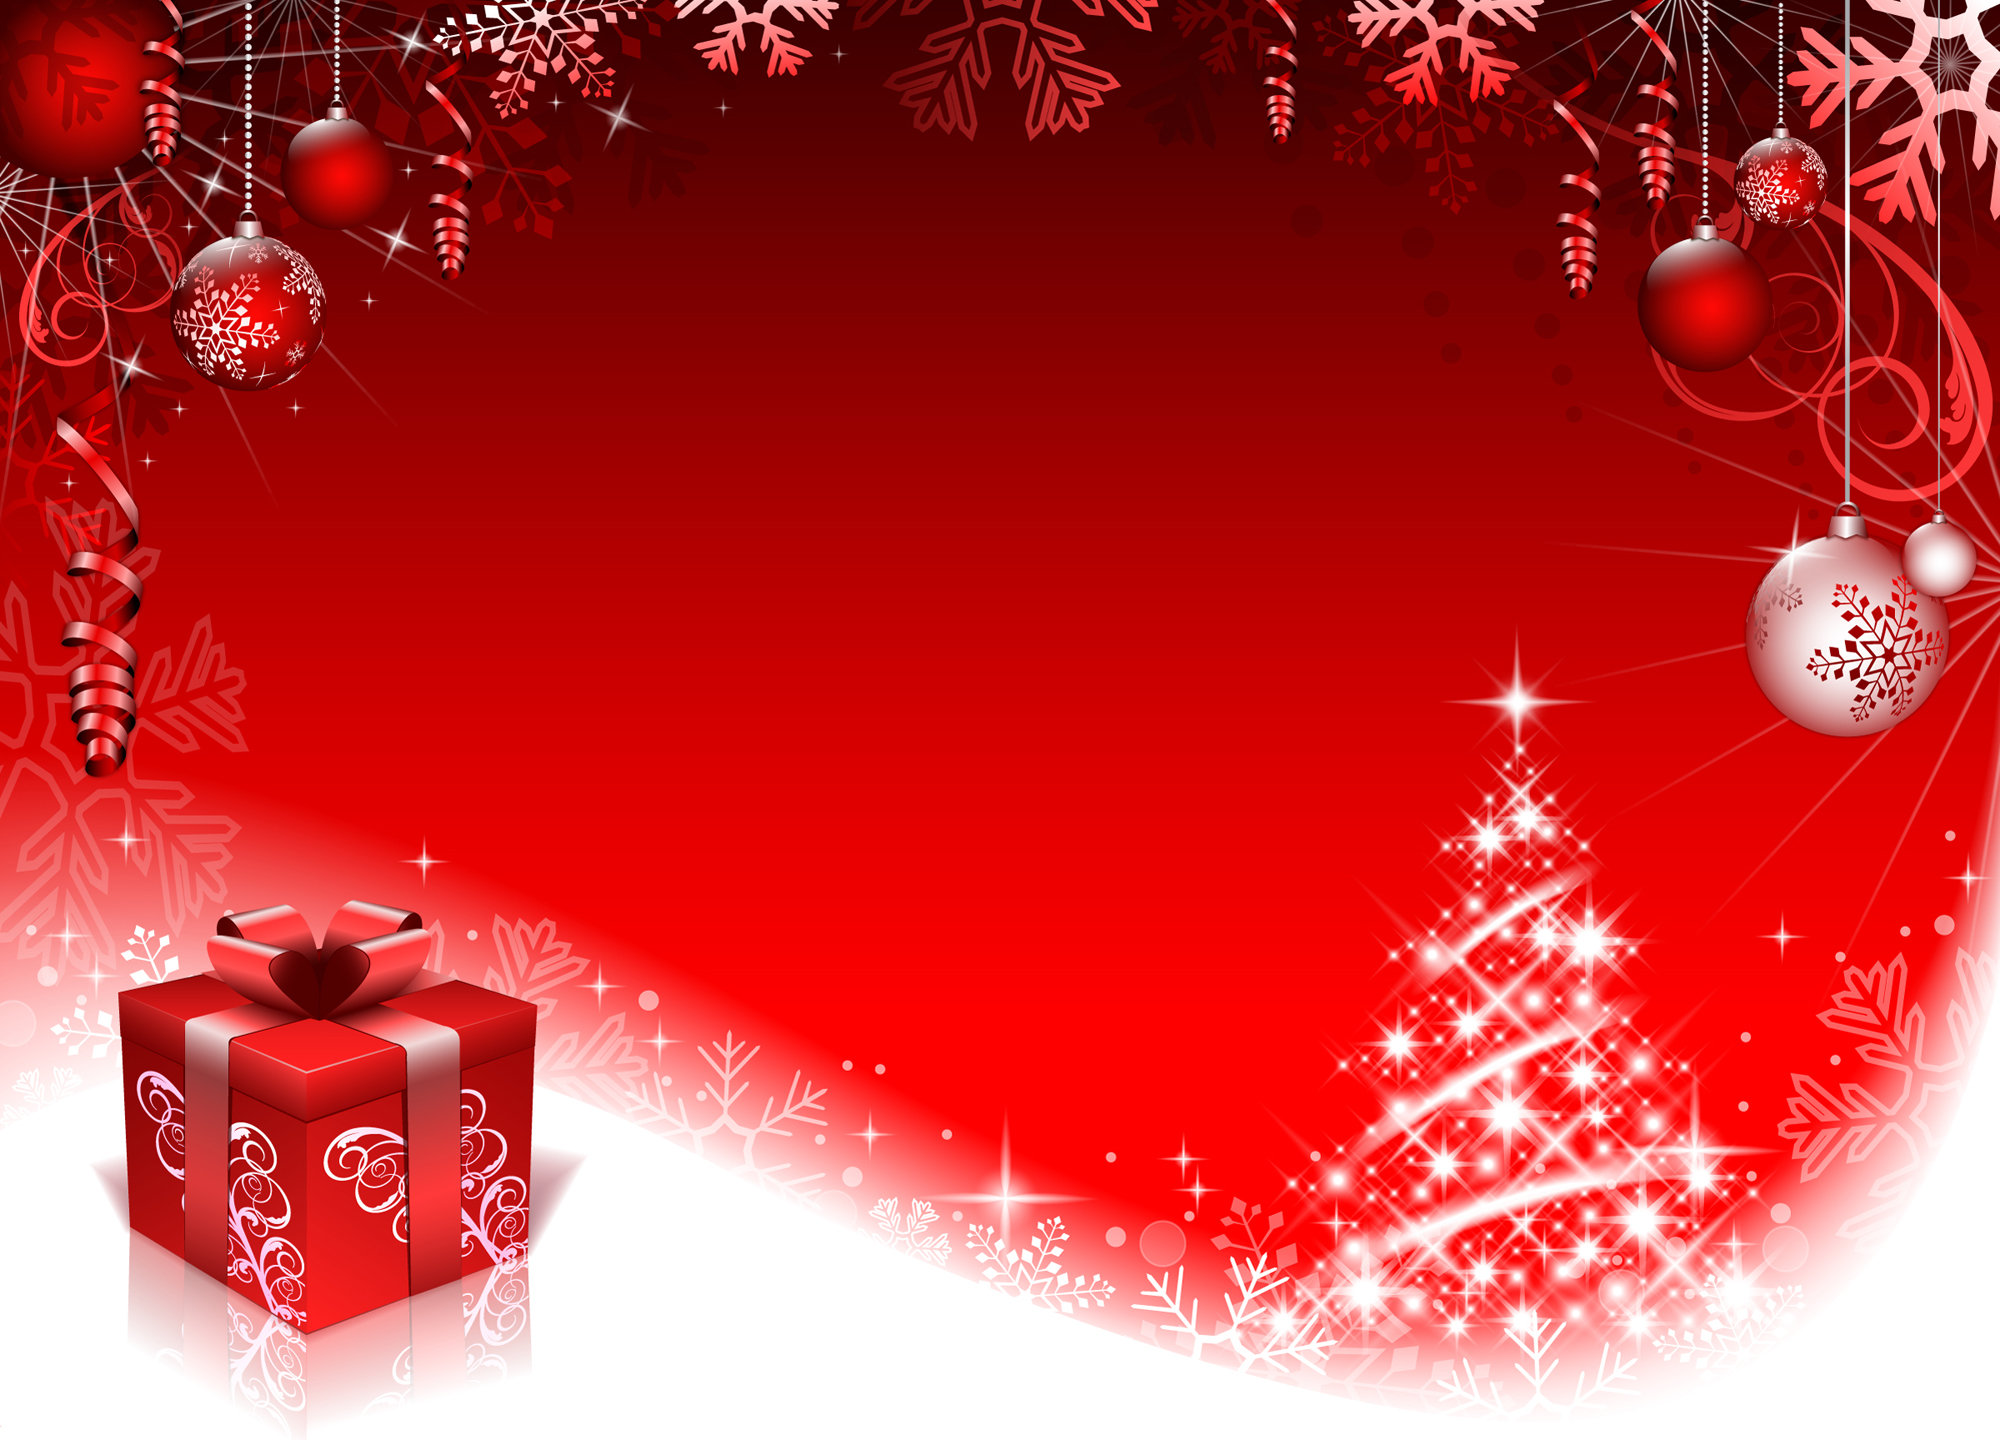 15 Christmas Card Backgrounds Photoshop Images   Free Red